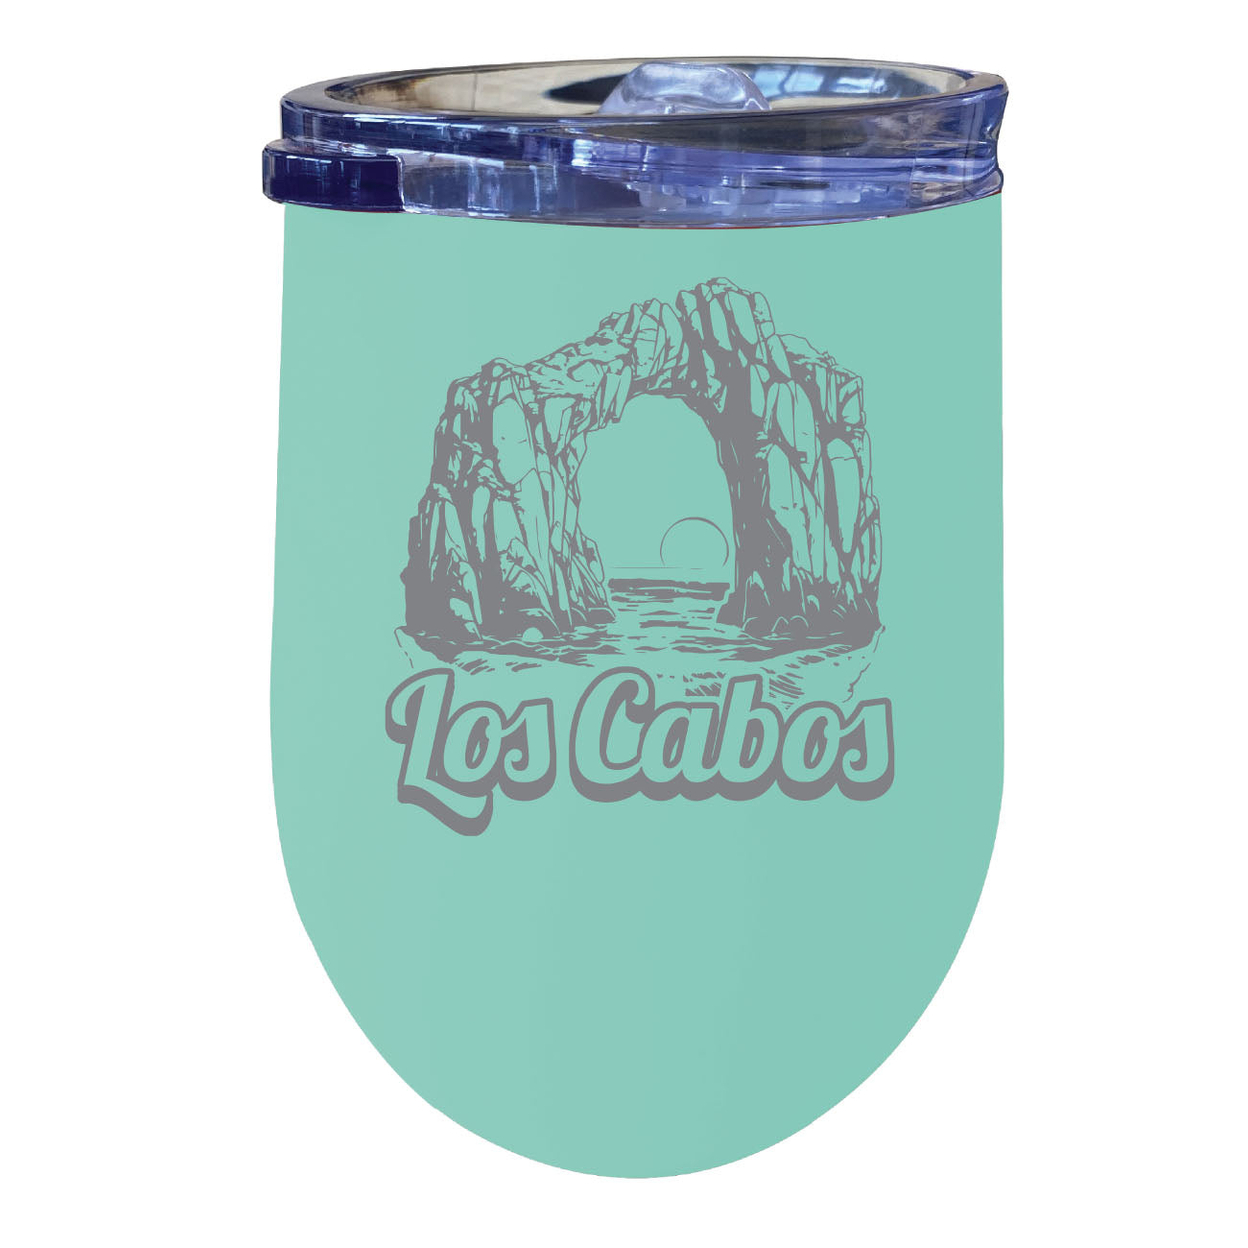 Los Cabos Mexico Souvenir 12 Oz Engraved Insulated Wine Stainless Steel Tumbler - Navy,,4-Pack